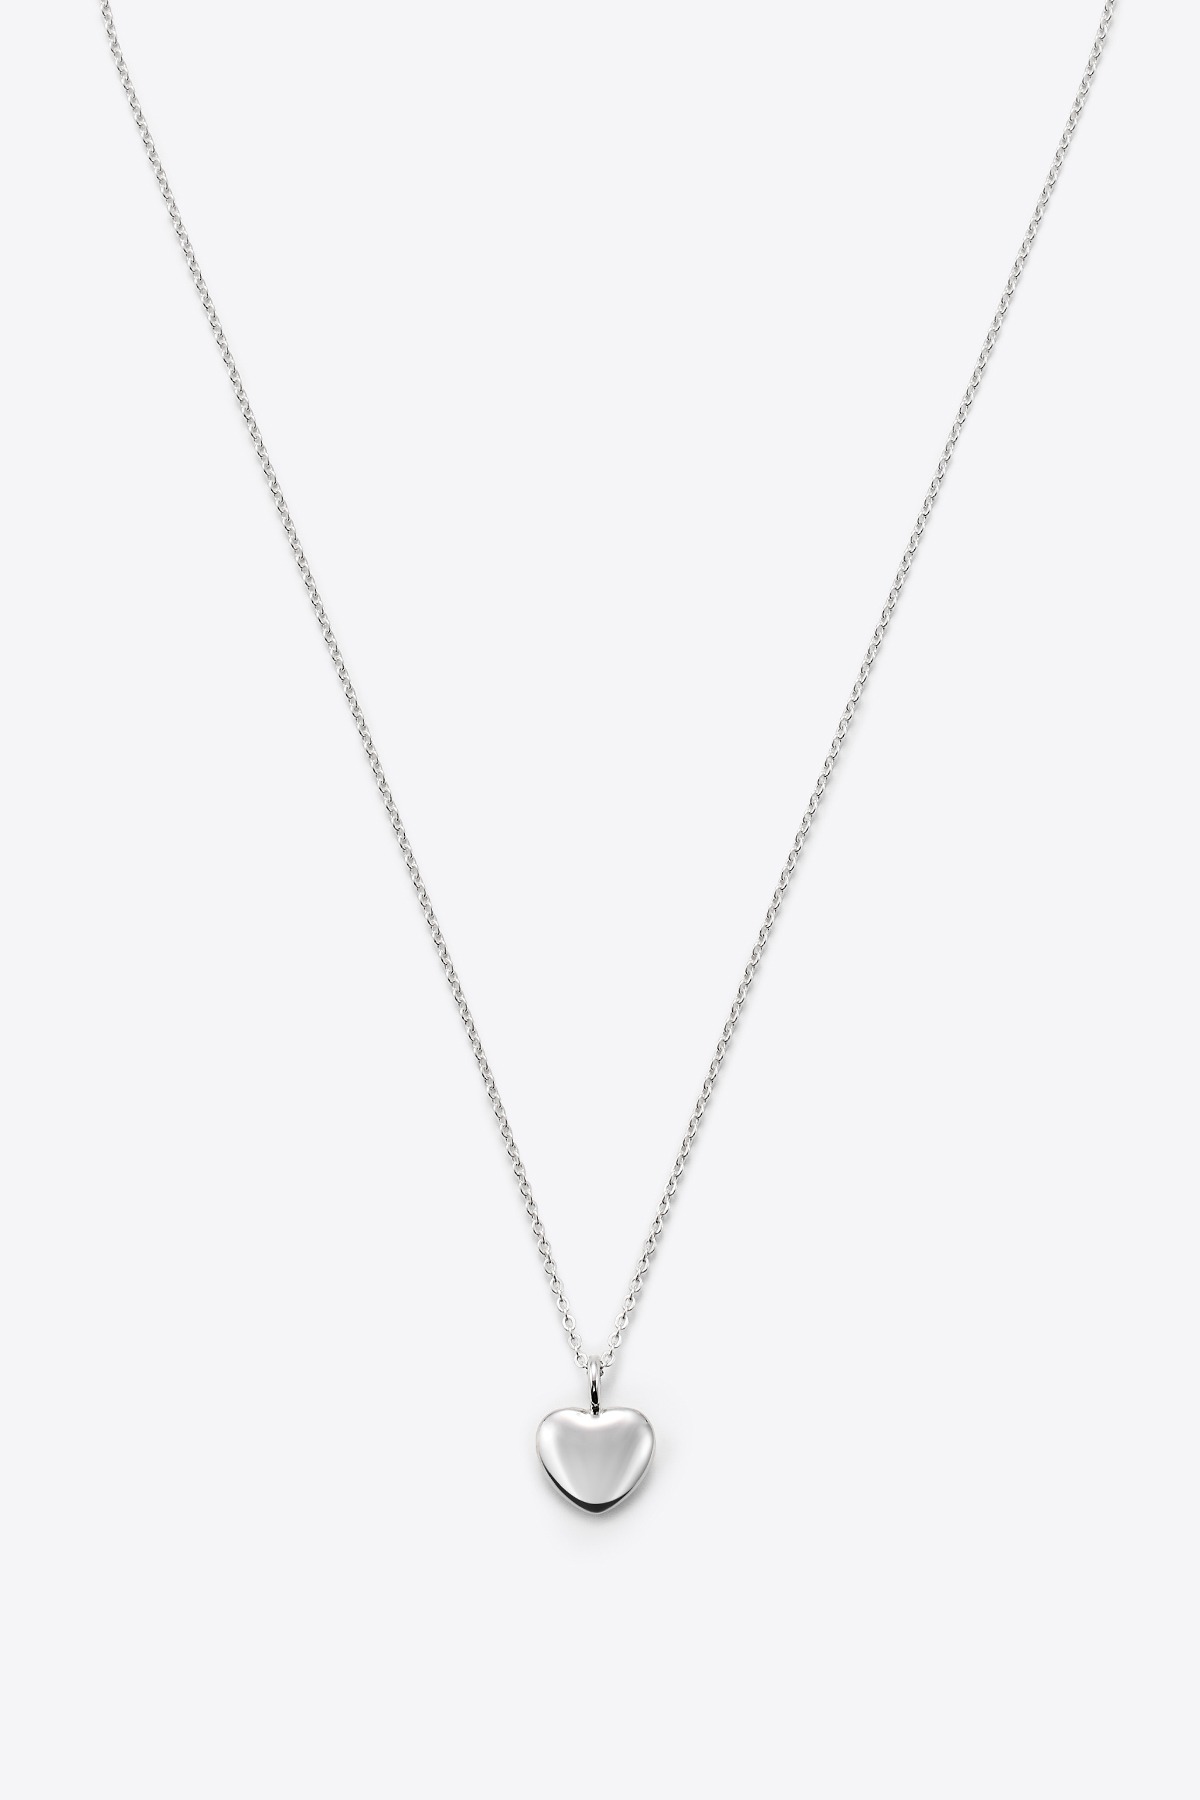 [usual ME] Pounding Heart Simple Necklace